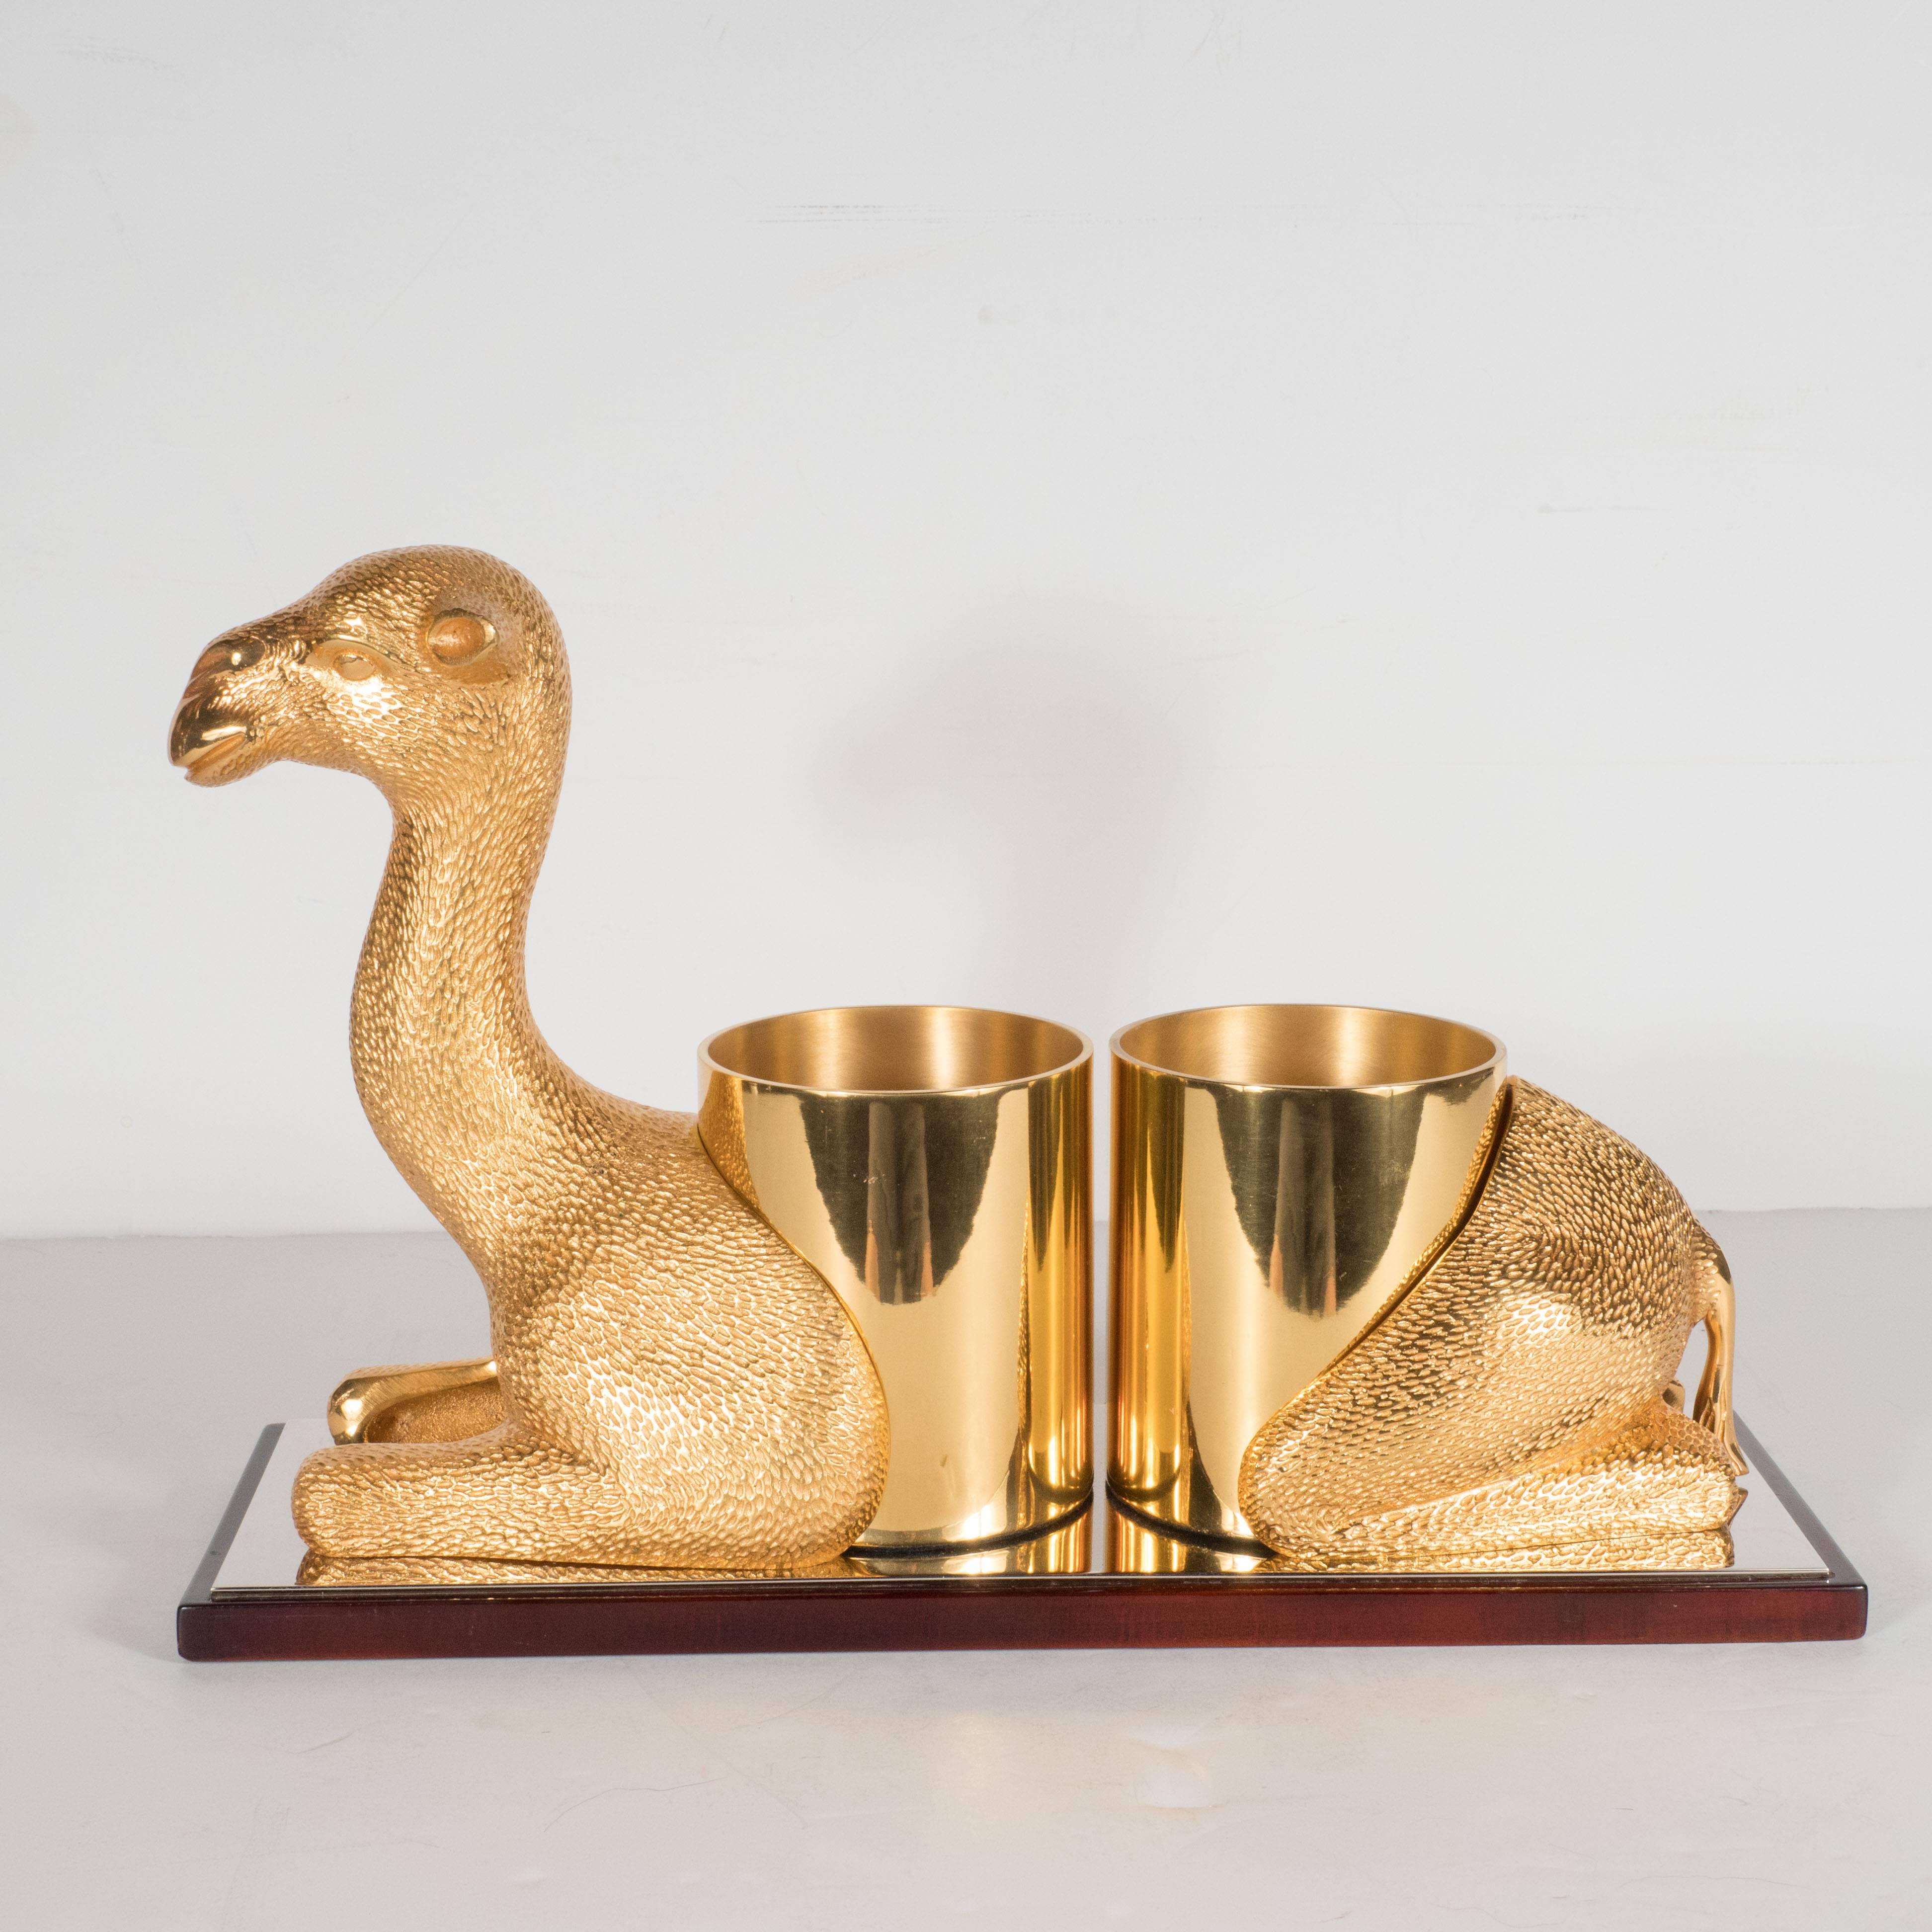 This ultra chic bottle holder features a whimsical sculpture of a supine camel replete with an elaborately dimpled exterior, representing its coat, and two cylindrical depressions in the center of its back perfect for accommodating two wine or